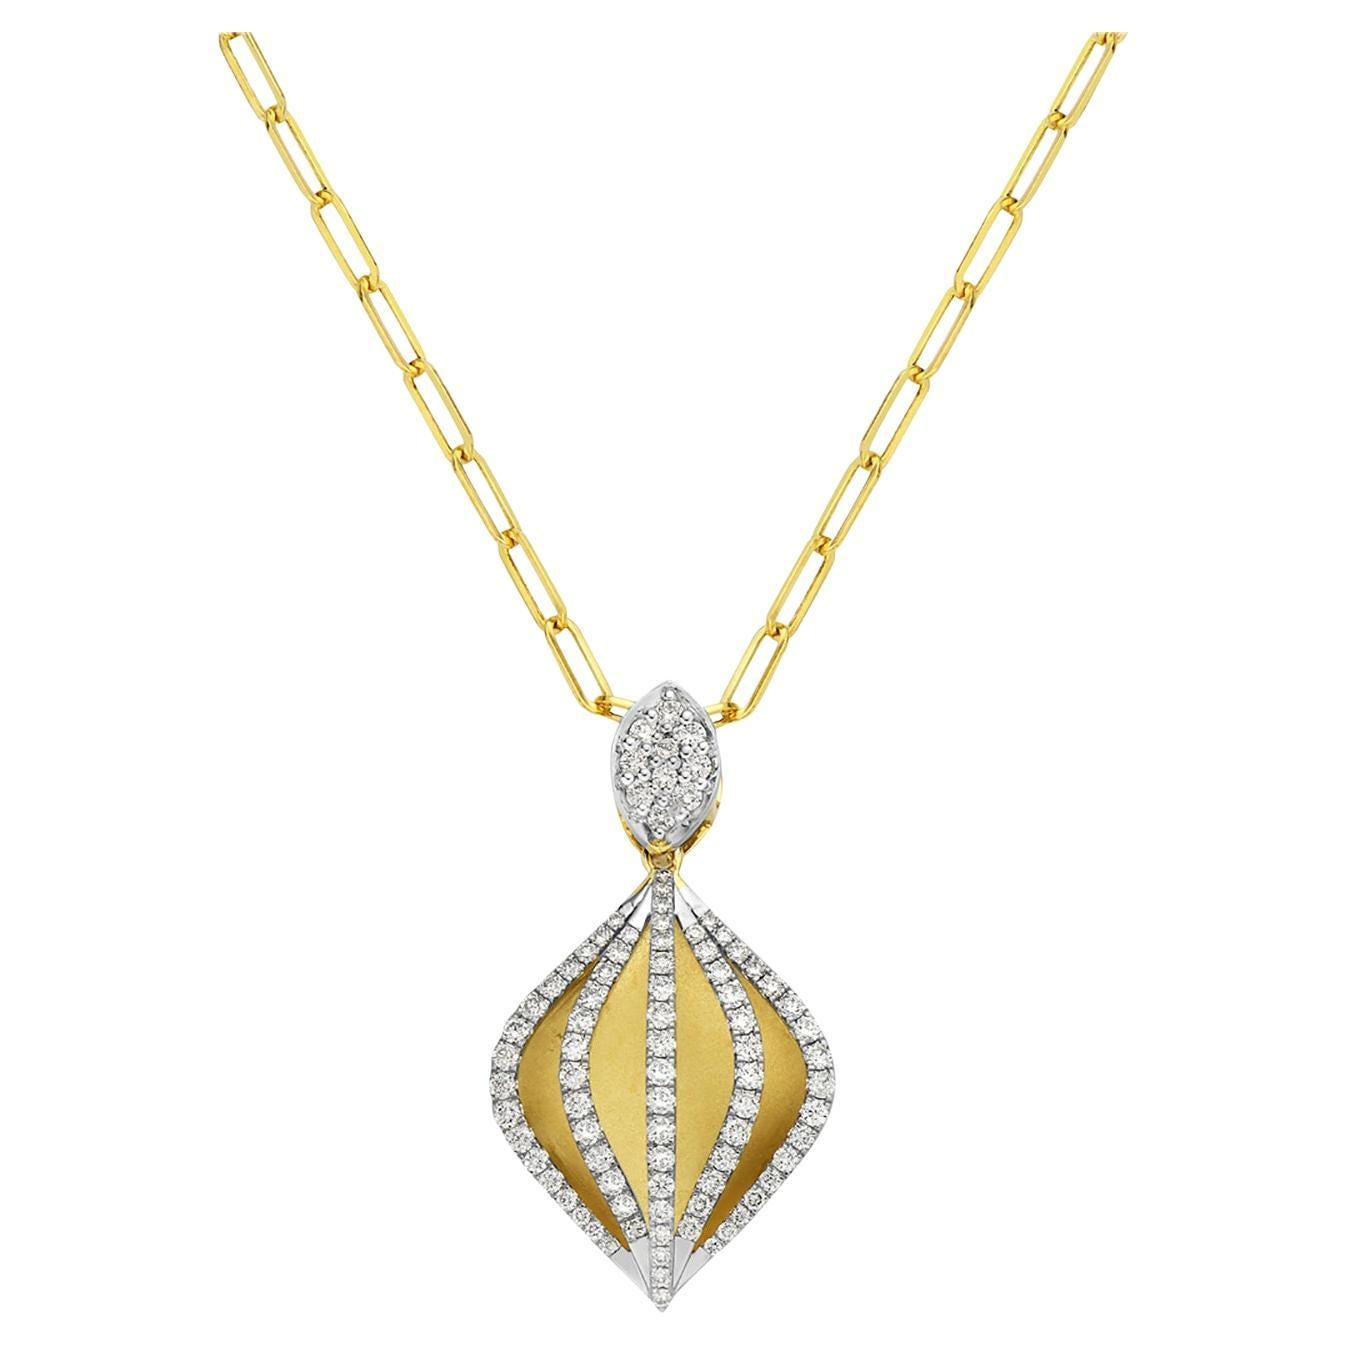 Pear Shaped Pendant with VS Diamonds Made in 14k Yellow Gold